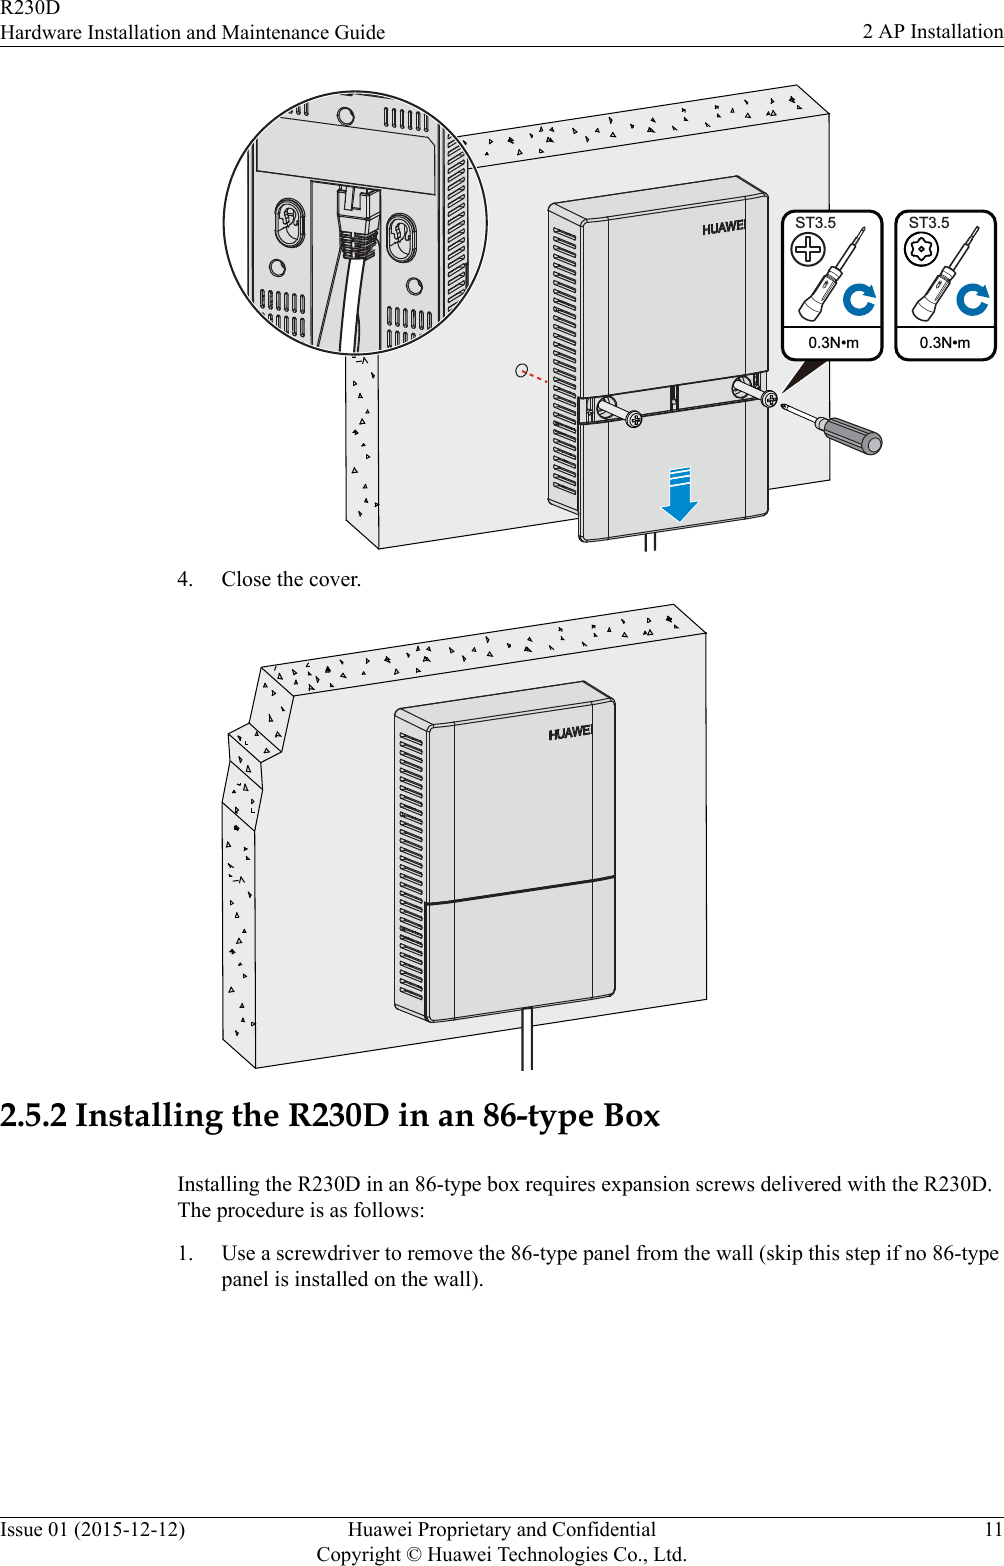  0.3N•mST3.50.3N•mST3.54. Close the cover.2.5.2 Installing the R230D in an 86-type BoxInstalling the R230D in an 86-type box requires expansion screws delivered with the R230D.The procedure is as follows:1. Use a screwdriver to remove the 86-type panel from the wall (skip this step if no 86-typepanel is installed on the wall).R230DHardware Installation and Maintenance Guide 2 AP InstallationIssue 01 (2015-12-12) Huawei Proprietary and ConfidentialCopyright © Huawei Technologies Co., Ltd.11